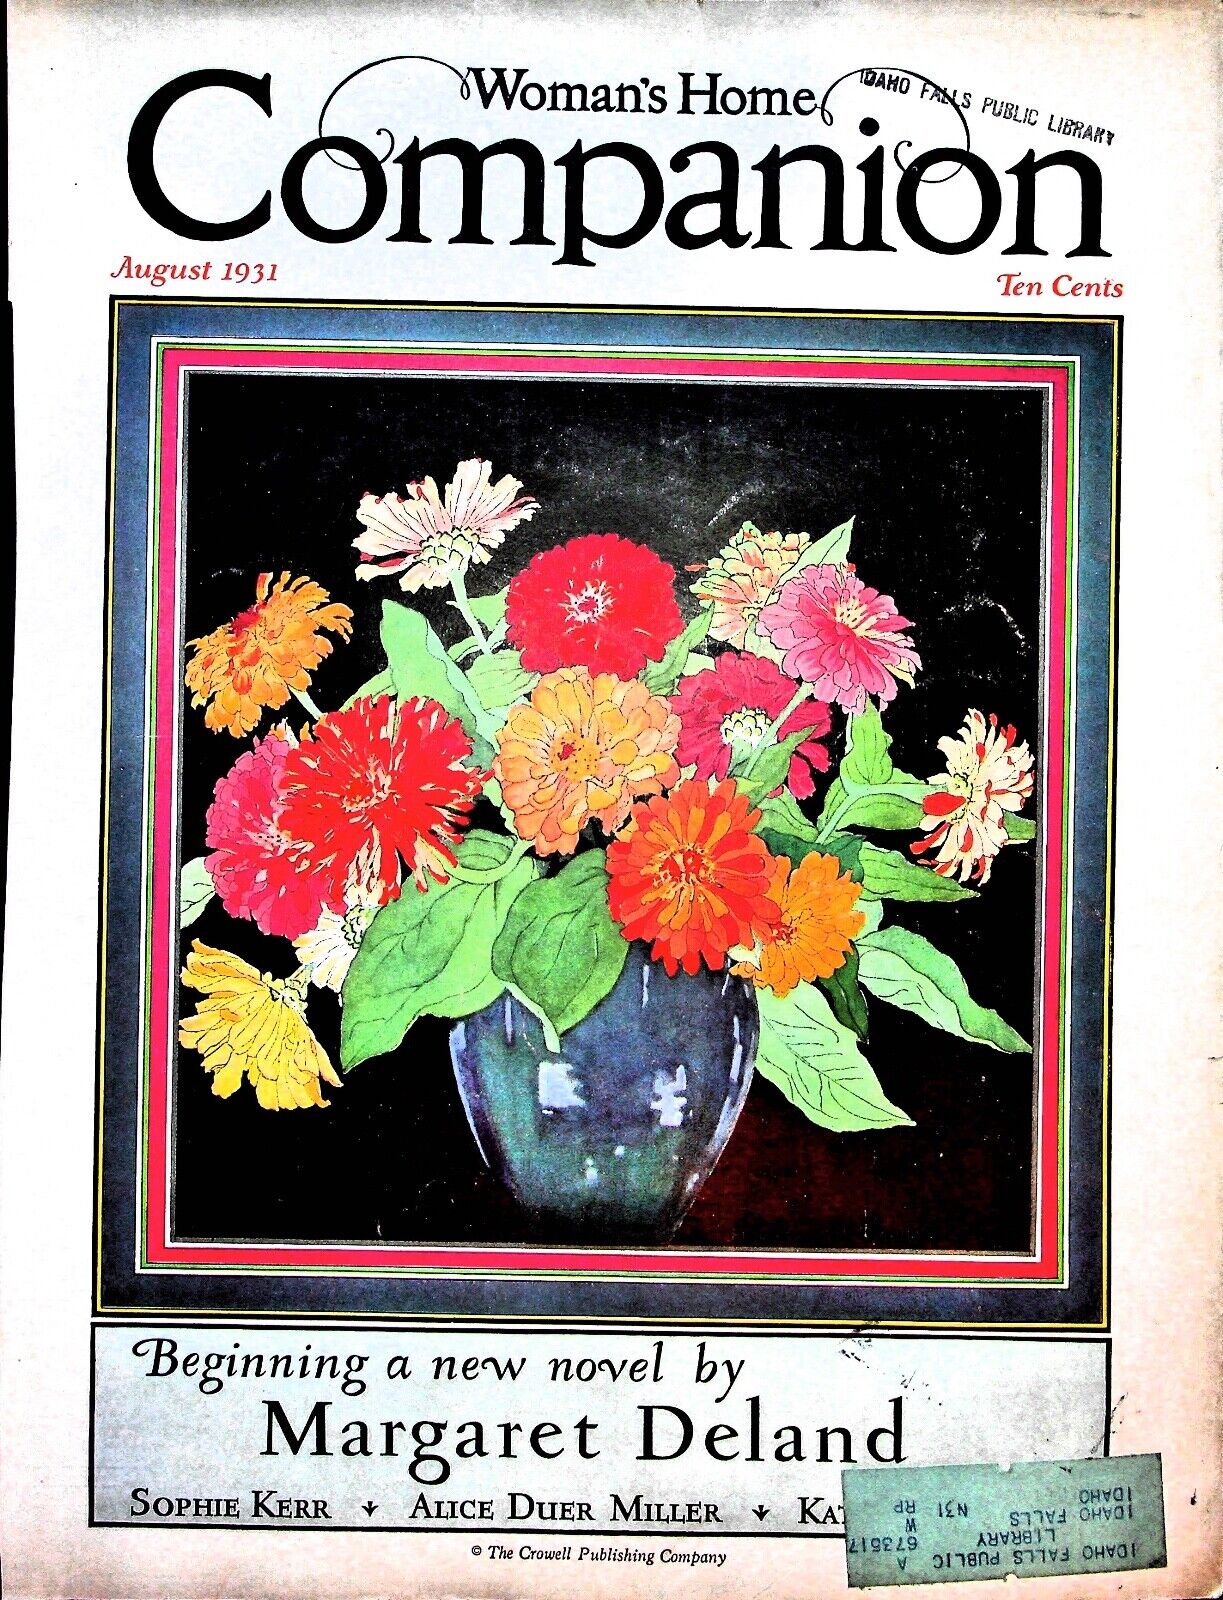 Original August 1931 Woman's Home Companion Cover: Flowers in vase